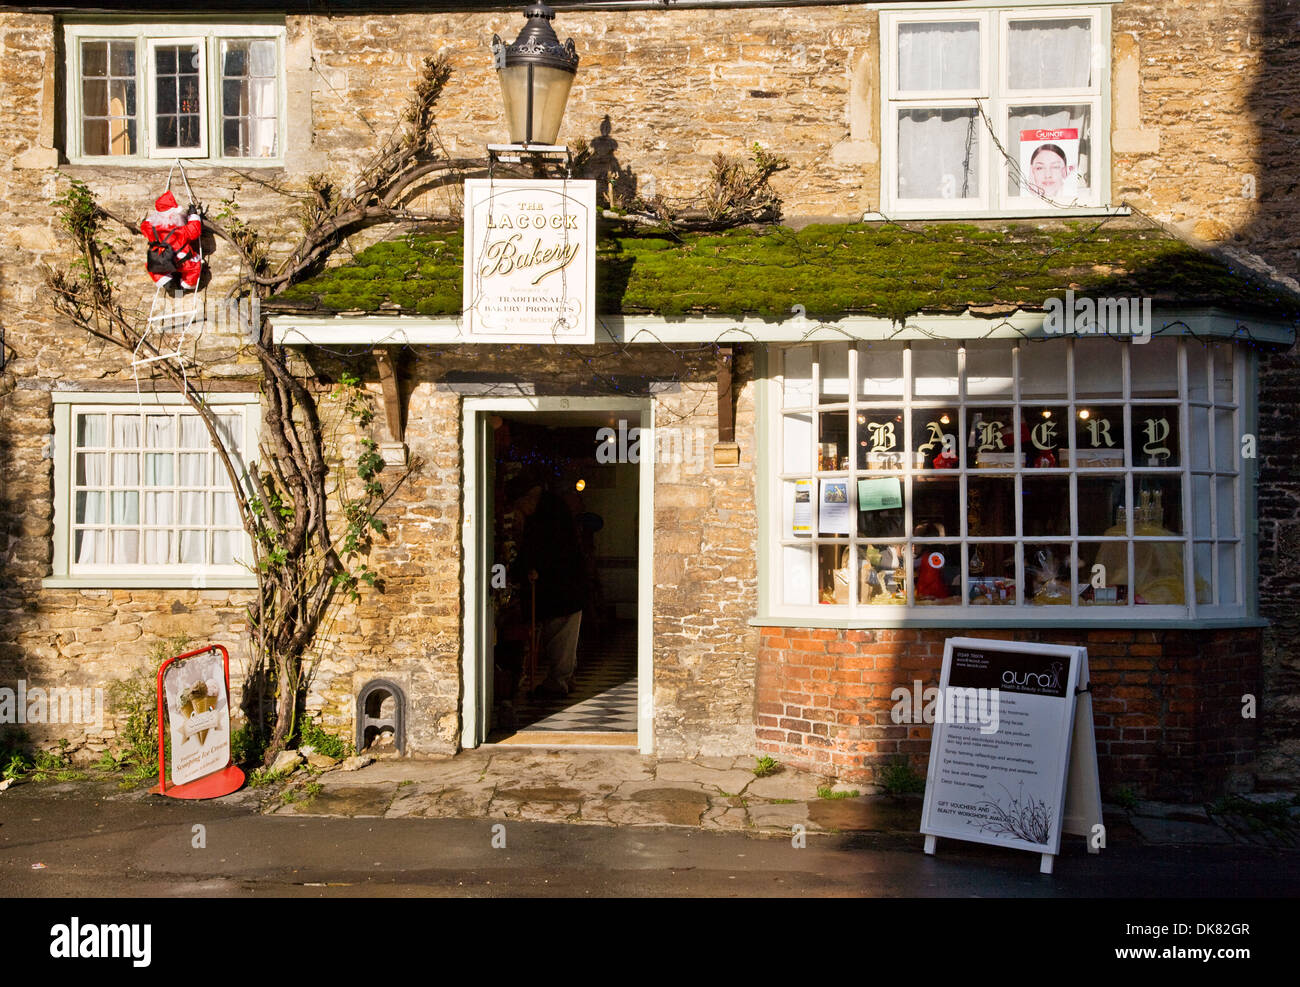 An old-fashioned baker's shop in the historic village of Lacock in Wiltshire. Stock Photo